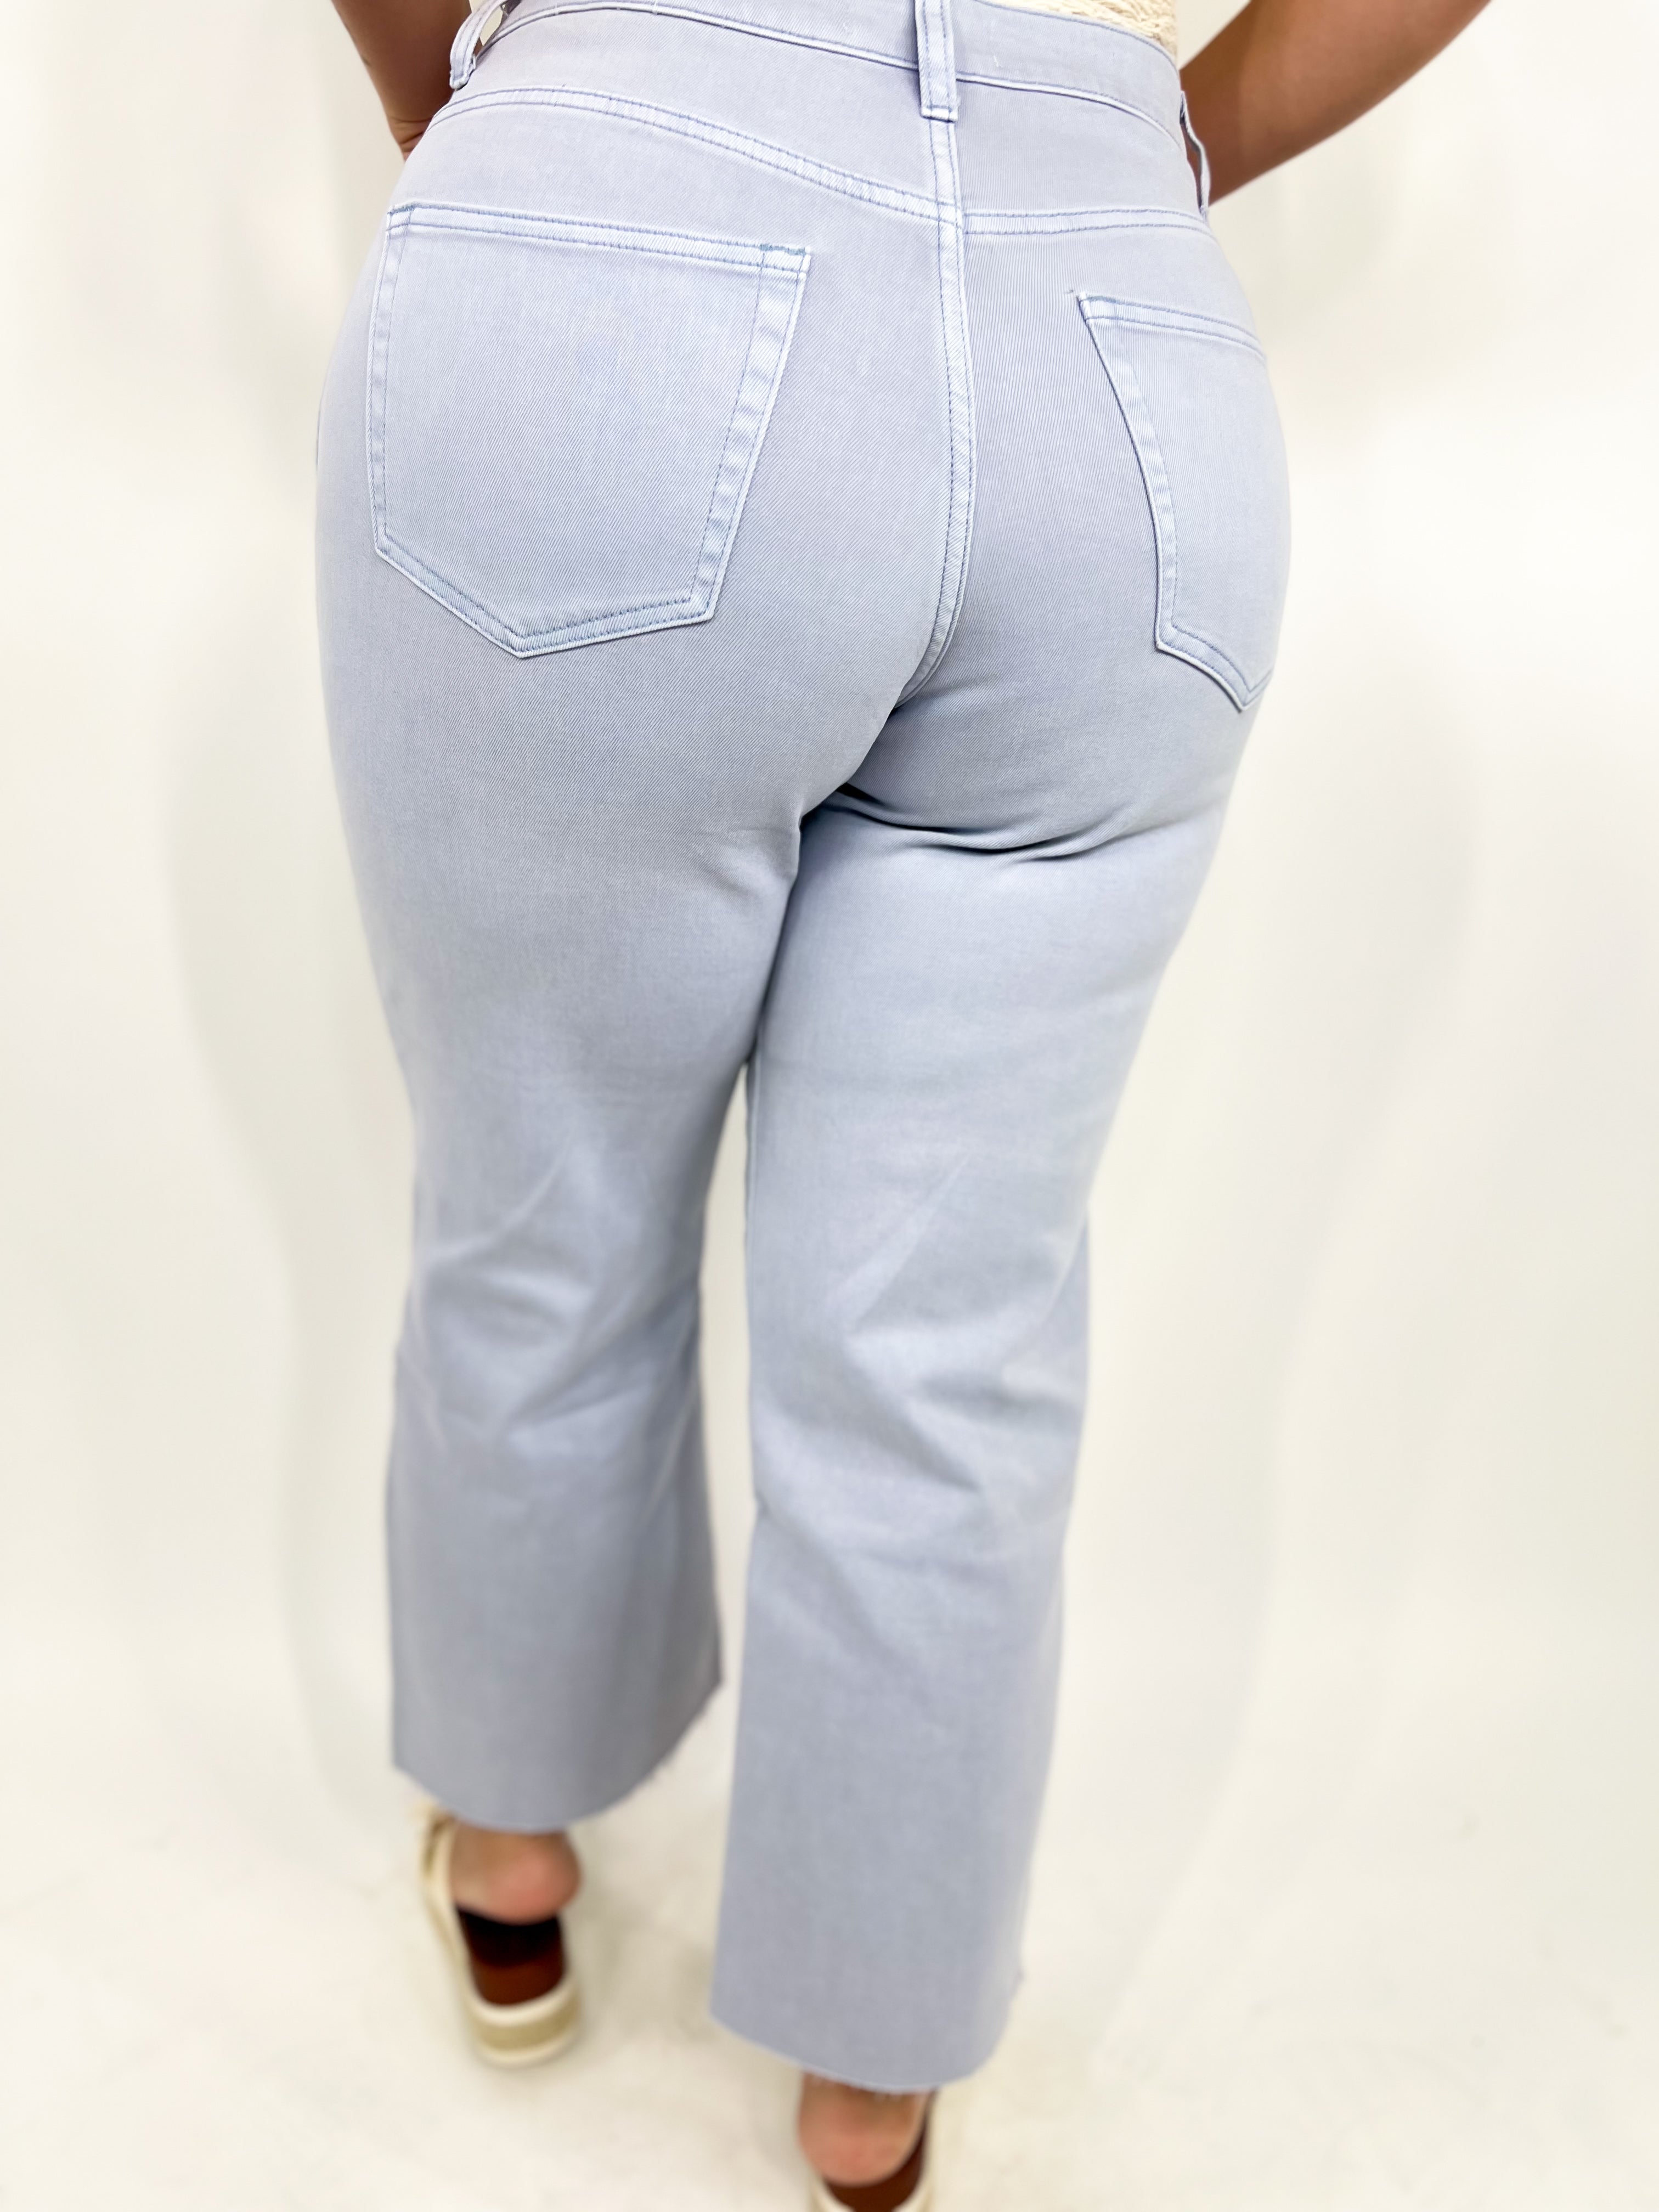 Grey Dawn Wide Leg Jeans-190 Jeans-Vervet-Heathered Boho Boutique, Women's Fashion and Accessories in Palmetto, FL